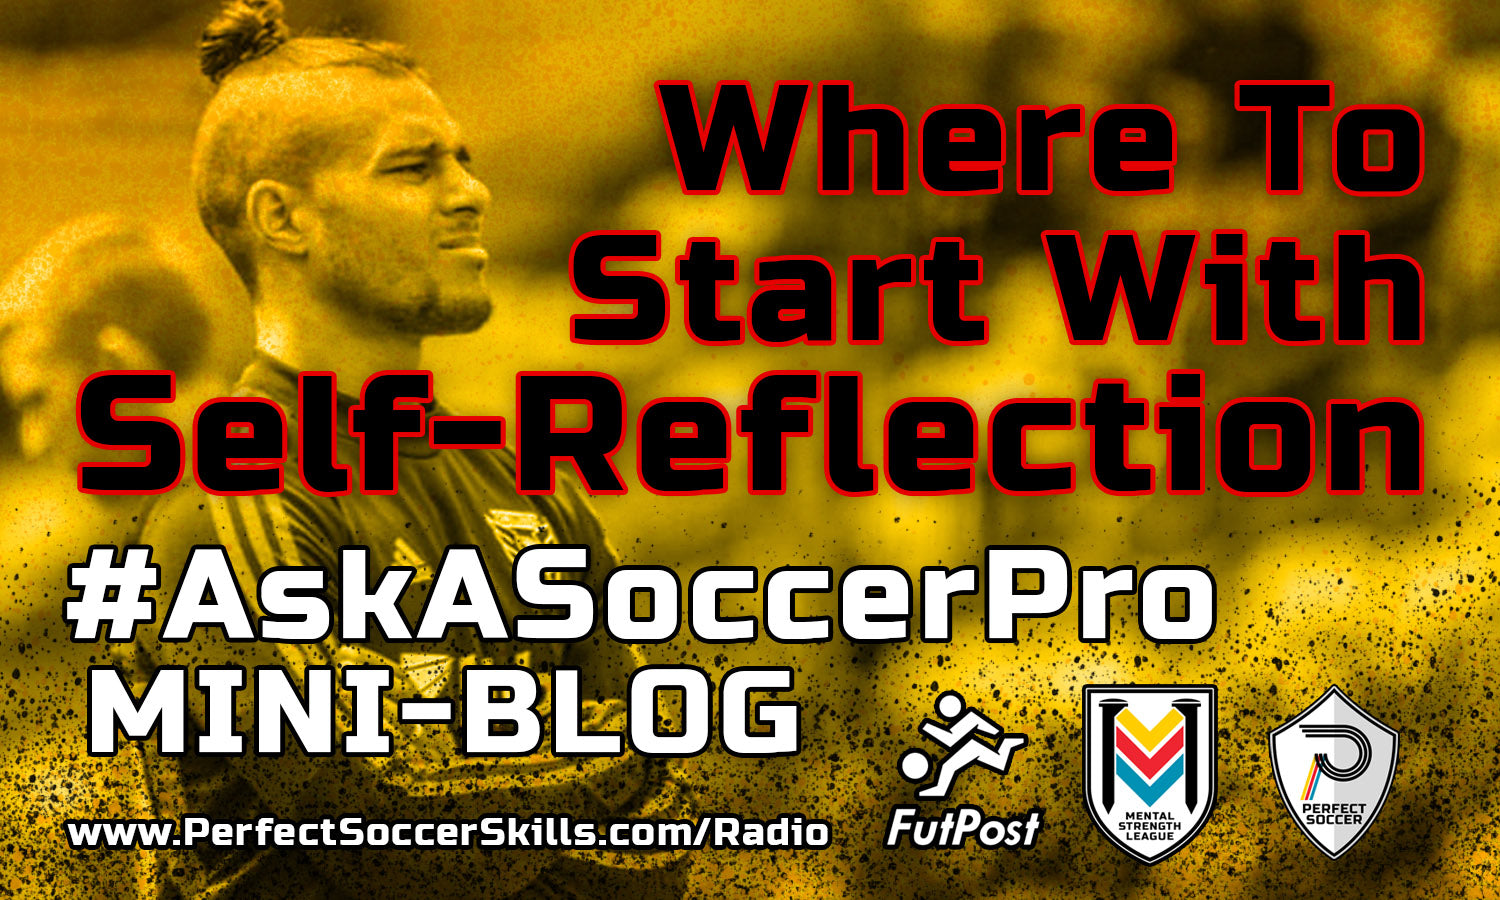 Where To Start With Self-Reflection #AskASoccerPro